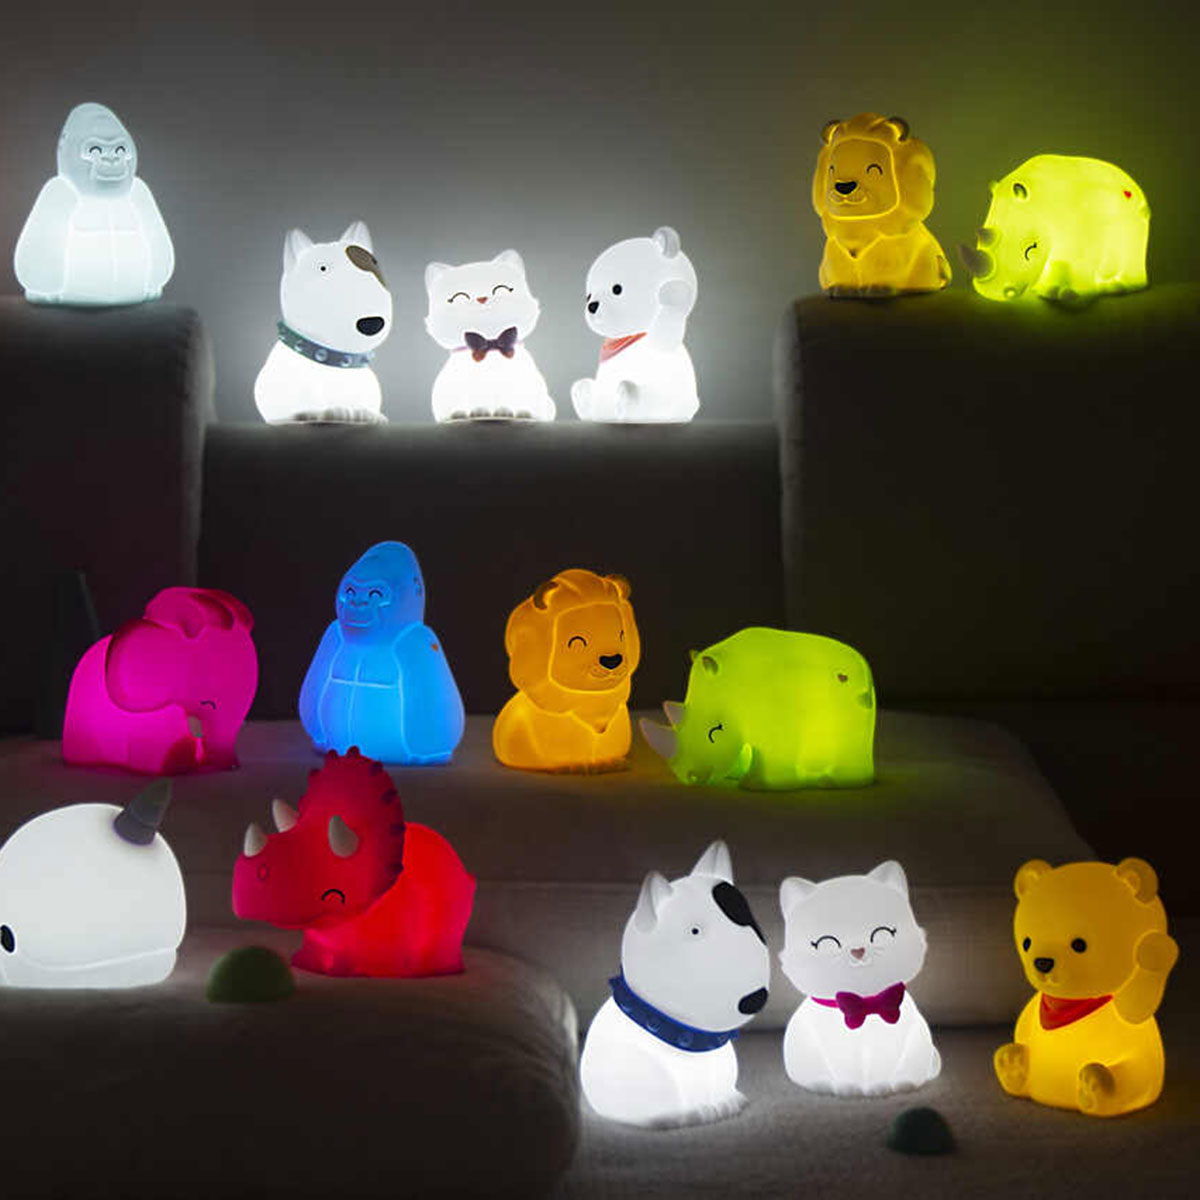 Soft rechargeable silicone night light - Cat